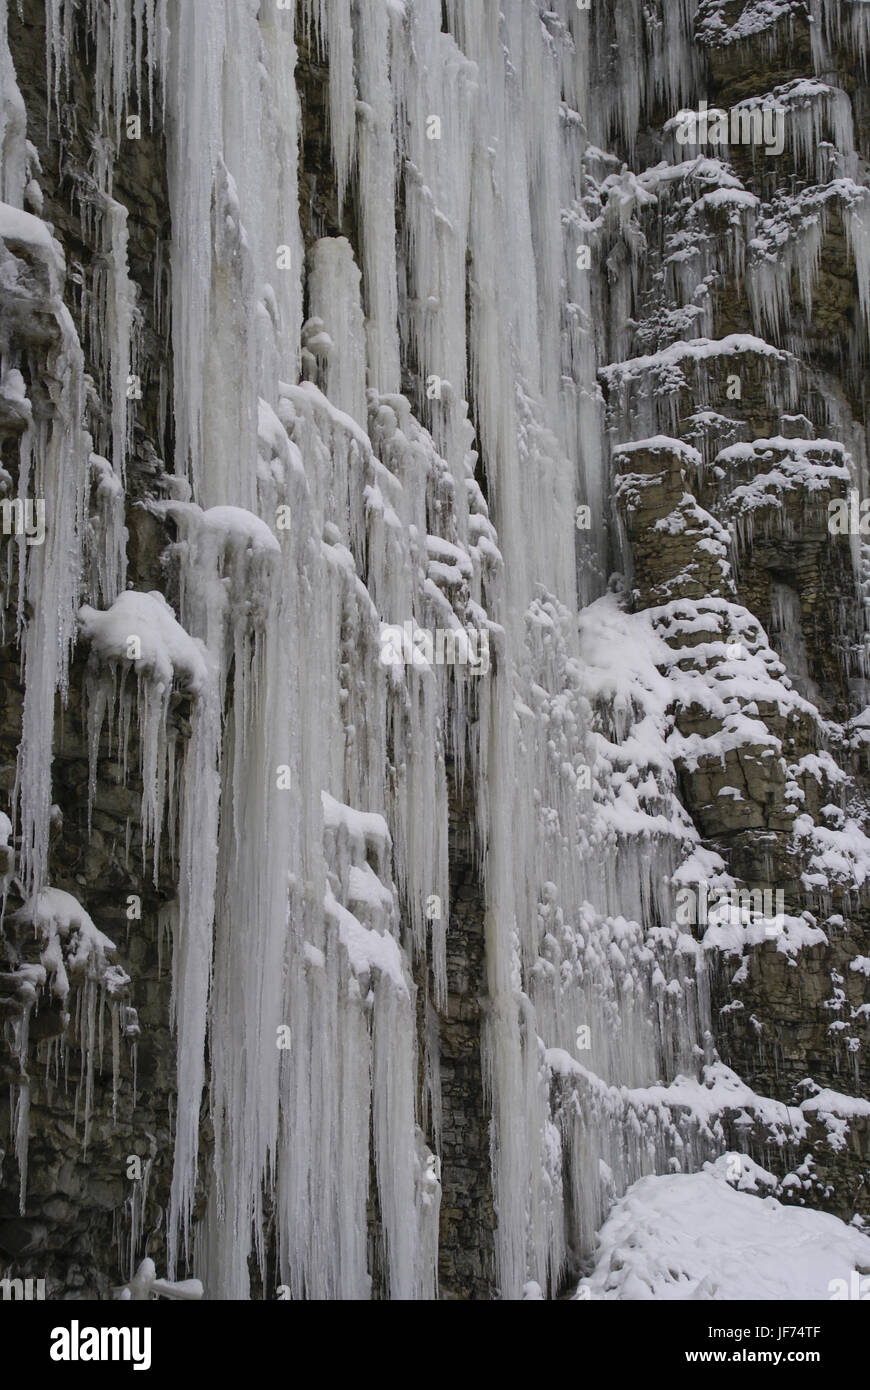 icicles in Quarry, Schwaebisch Hall, Germany Stock Photo